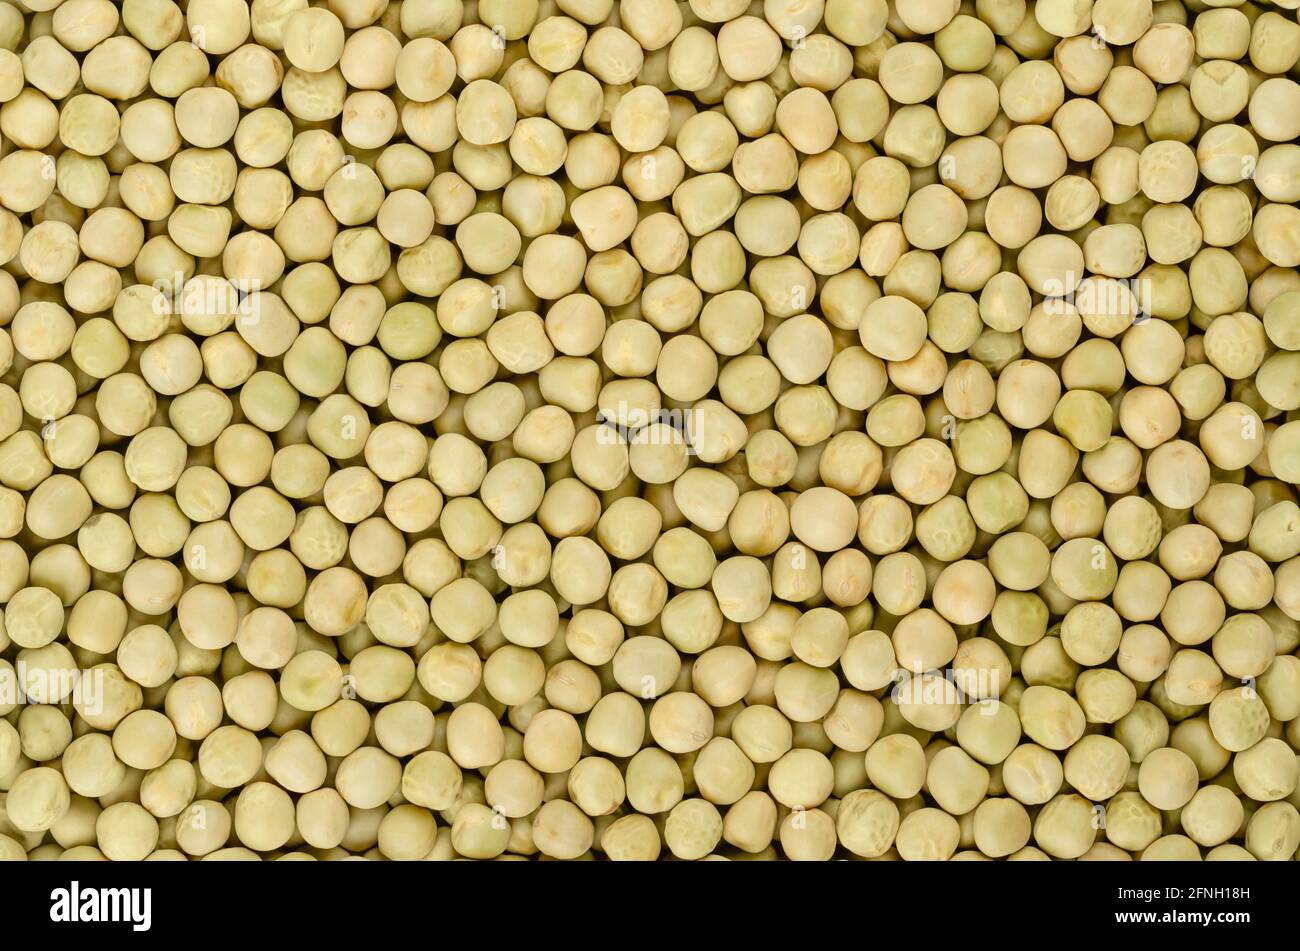 Dried whole peas, background, from above. Raw small spherical seeds of the pod fruit Pisum sativum with greenish and yellowish color. Stock Photo